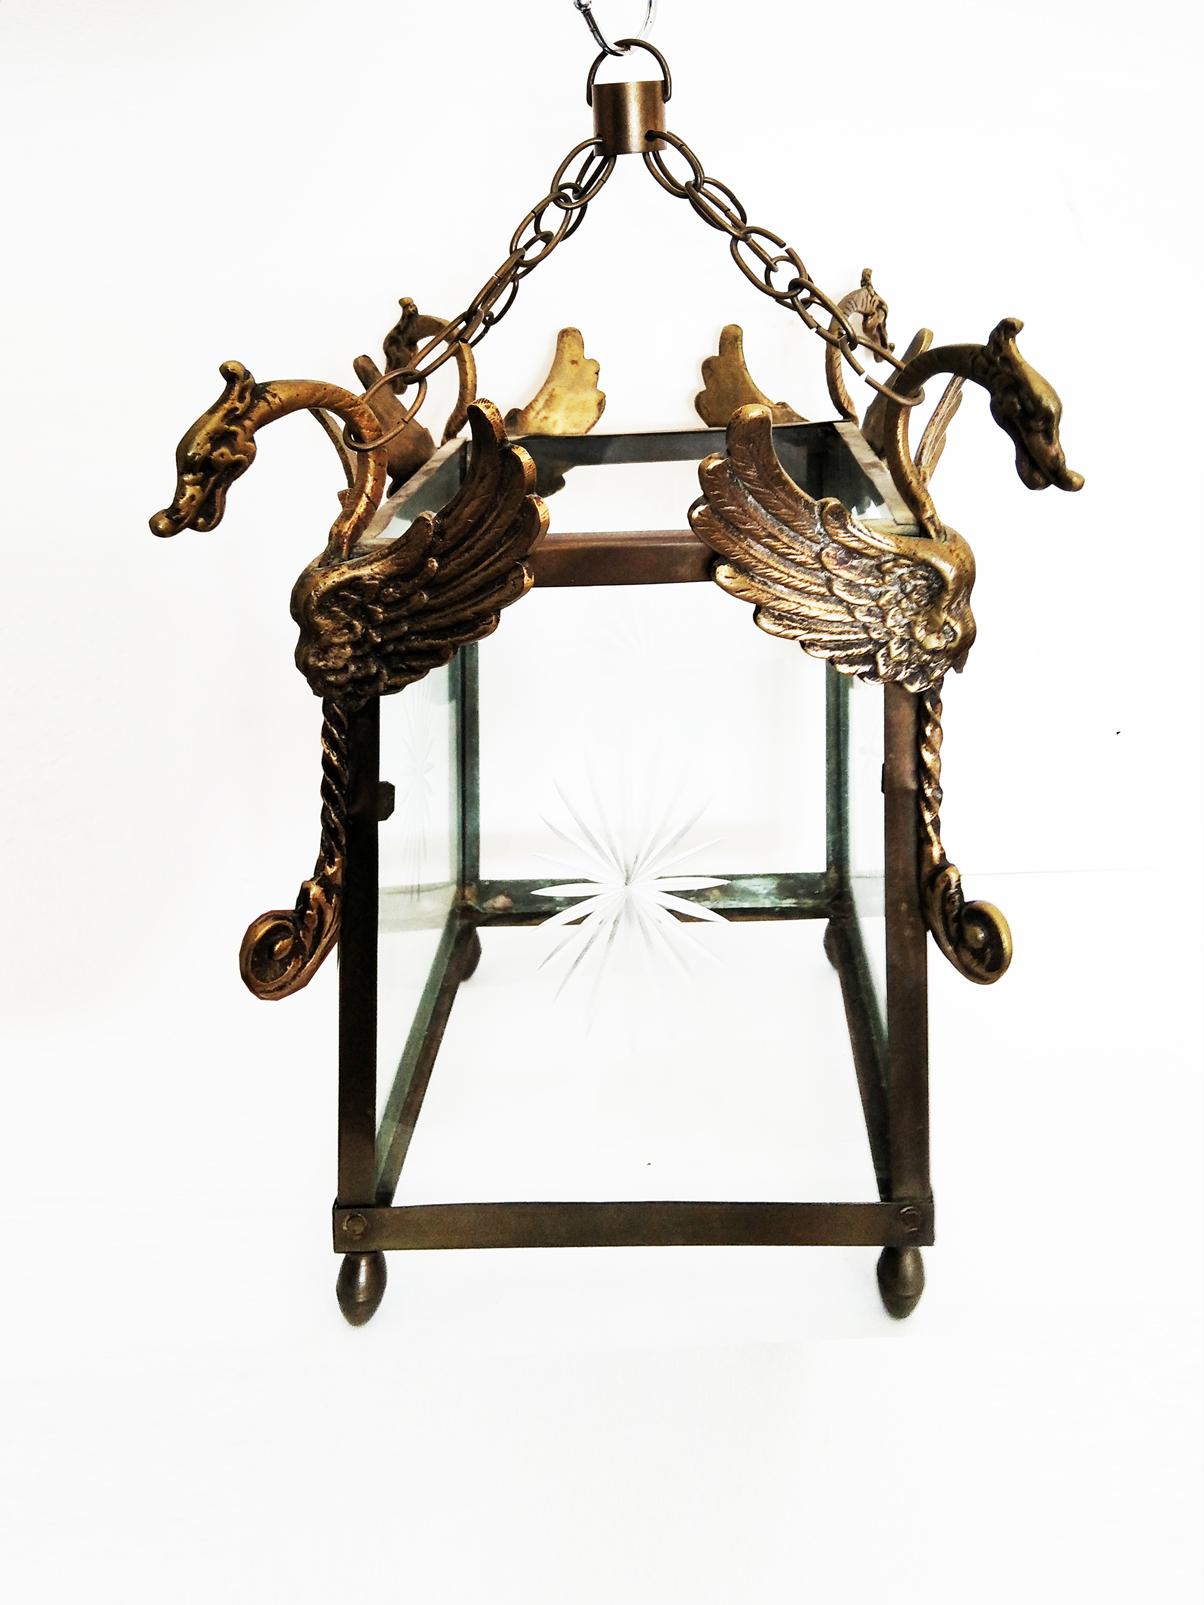 Cast  Brass or Bronze and Glass Lantern  Art Deco   Chinoiserie Style 